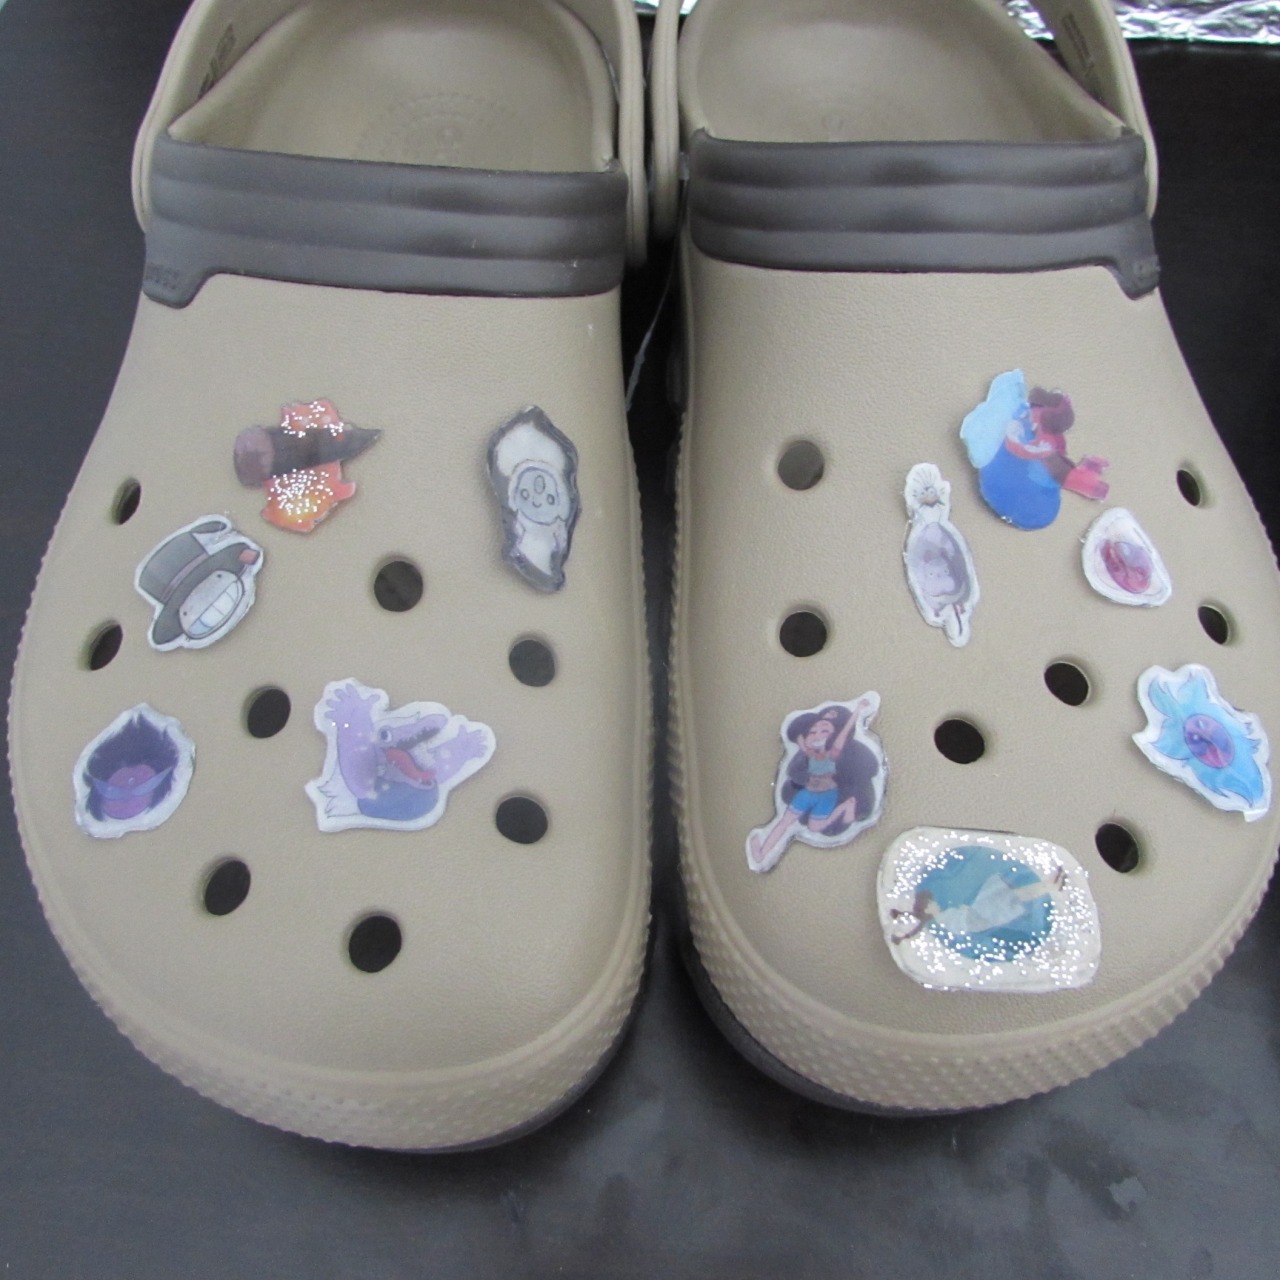 things that you put on crocs